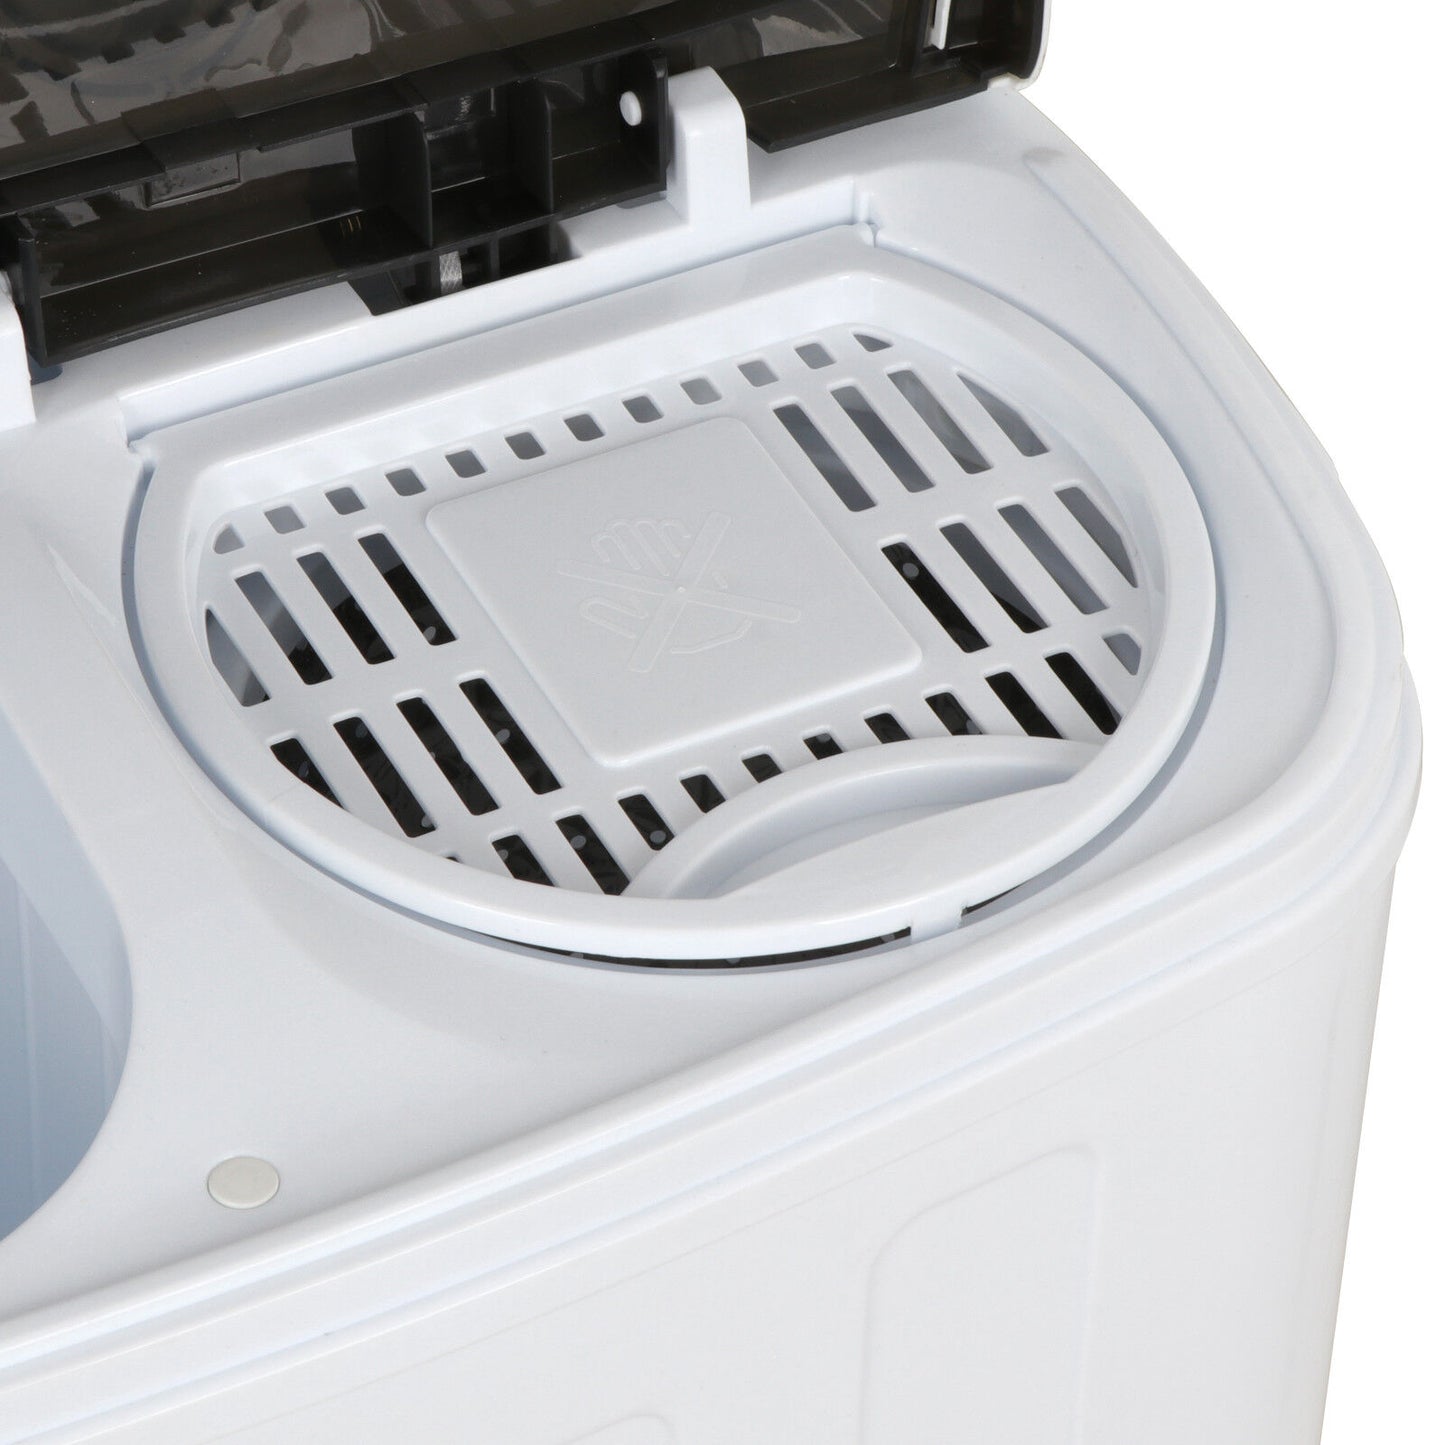 White Compact Portable Washer & Dryer with Mini Washing Machine and Spin Dryer